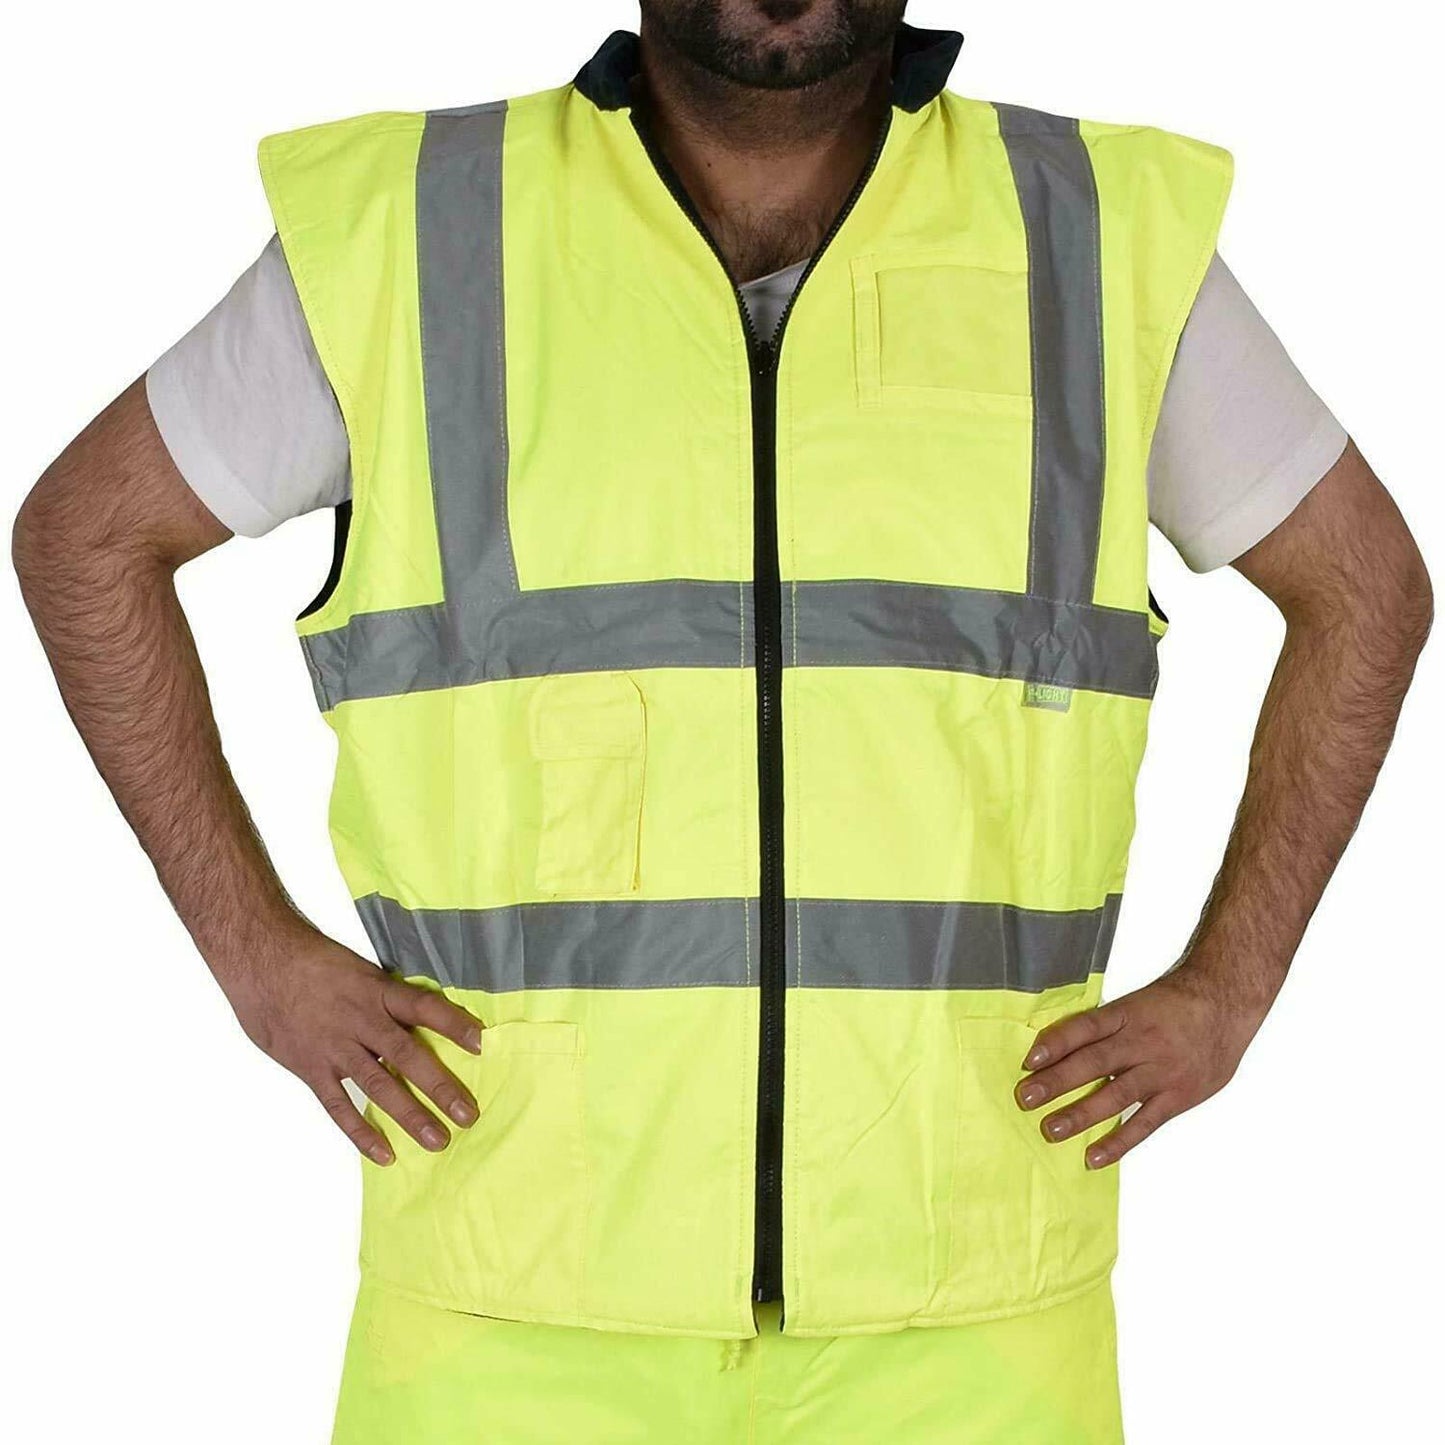 Hi Vis Yellow EN471 Class 2 Work Wear Gilets. These Have Multiple Pockets At The Front. It Is A Zip Fastening. The Gilets Have The CE Testing Mark Demonstrating Compliance With 89/686/EEC Personal Protective Equipment Annex 11 Heath And Safety Requirements. They Have Also Been manufactured Under Rigorous ISO9001 Quality Process Standards. These Are Also  Available In Orange In Sizes Small To 5 X-Large.